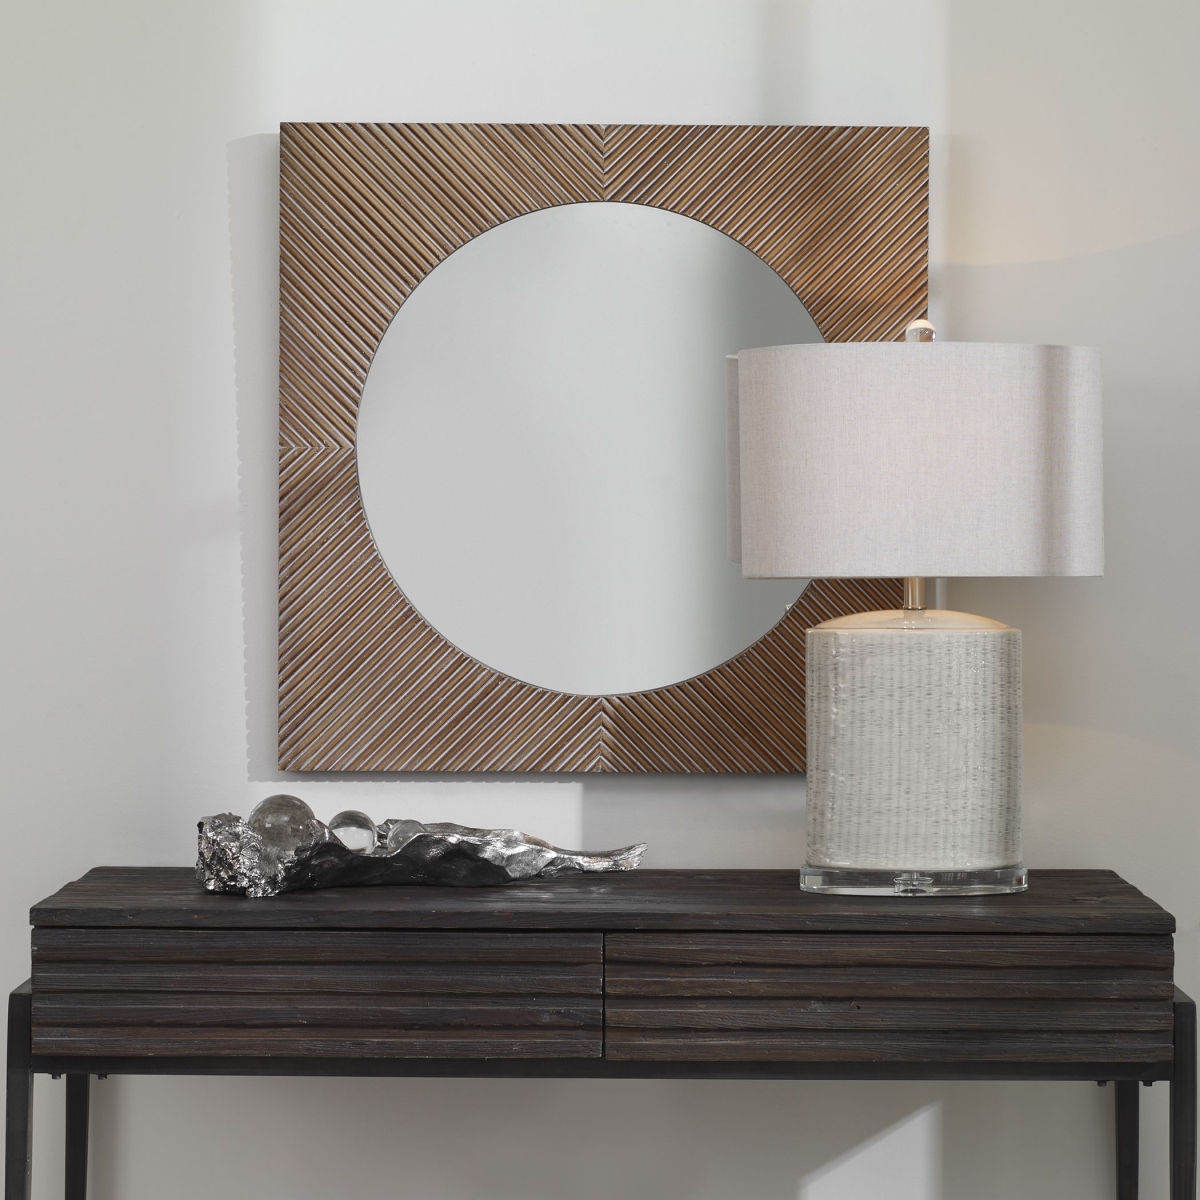 Picture of 212 Main 09689 36 x 4 x 48 in. Uma Wooden Square Mirror